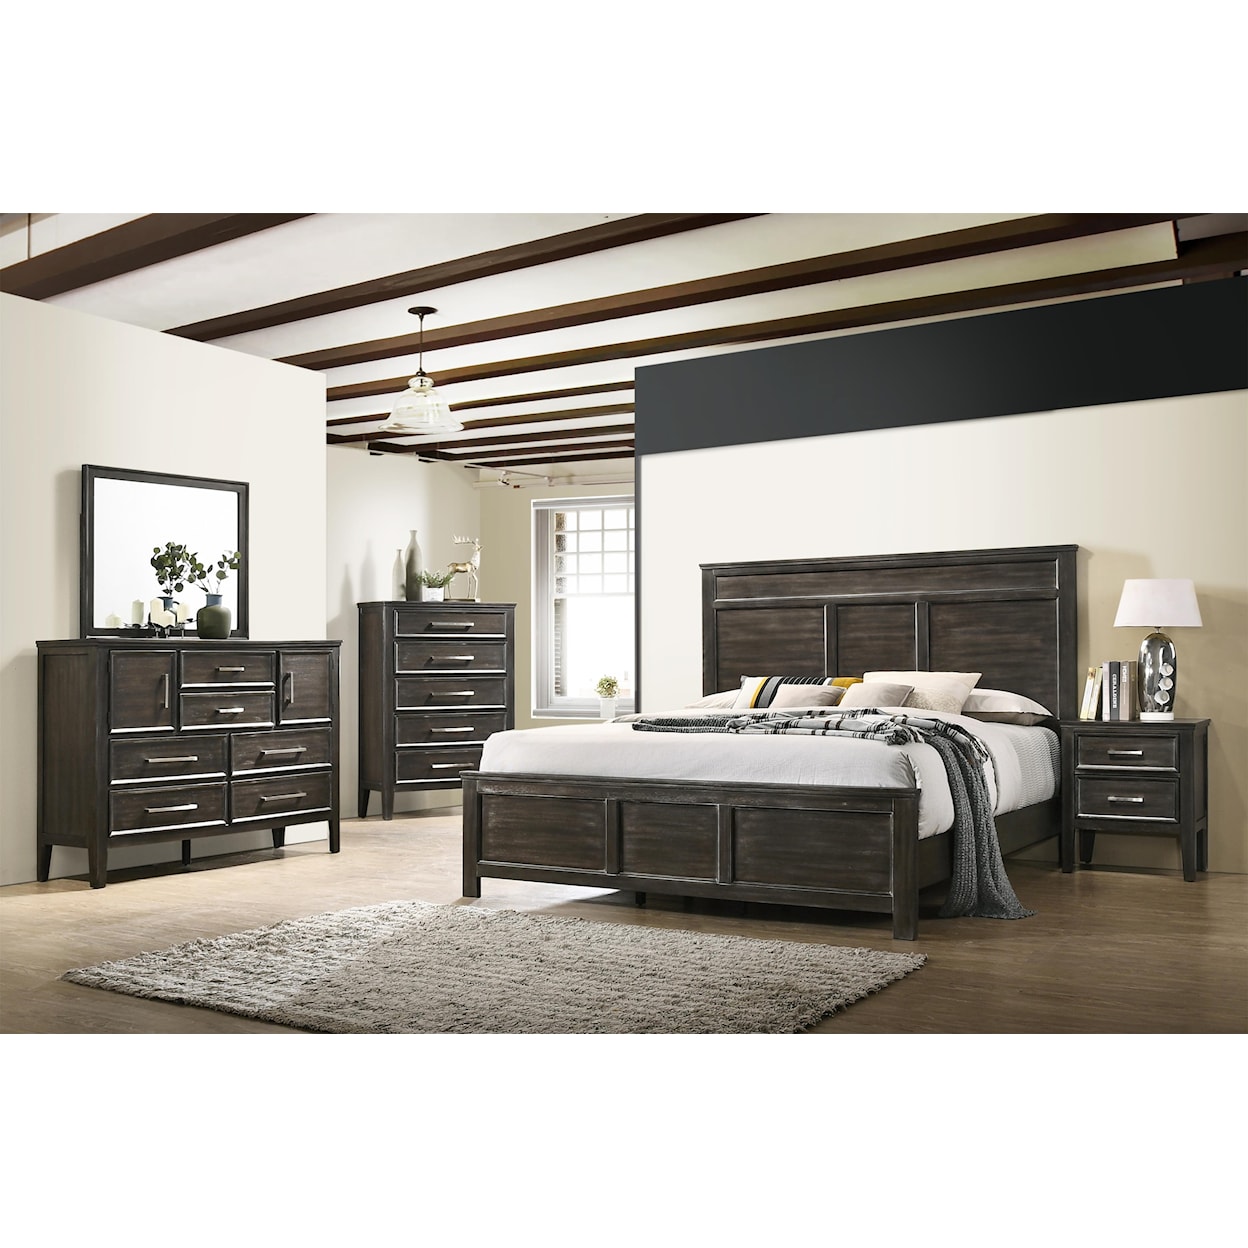 New Classic Andover Twin Bedroom Group